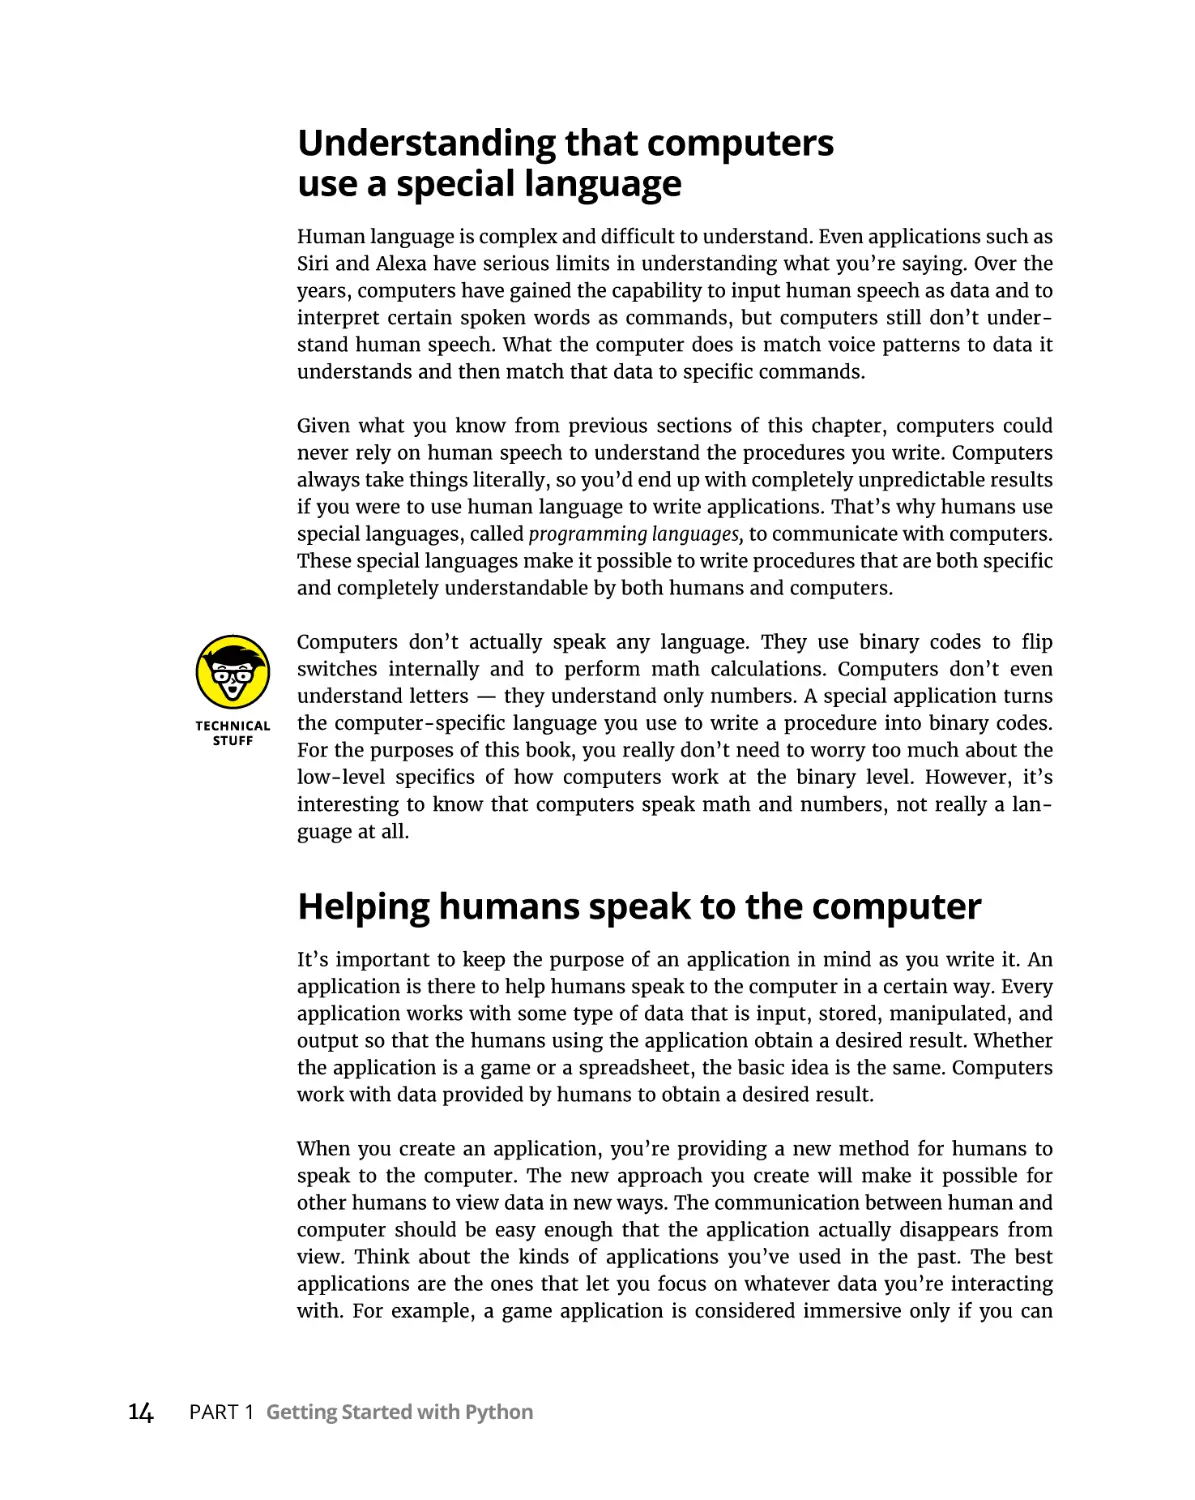 Understanding that computers use a special language
Helping humans speak to the computer